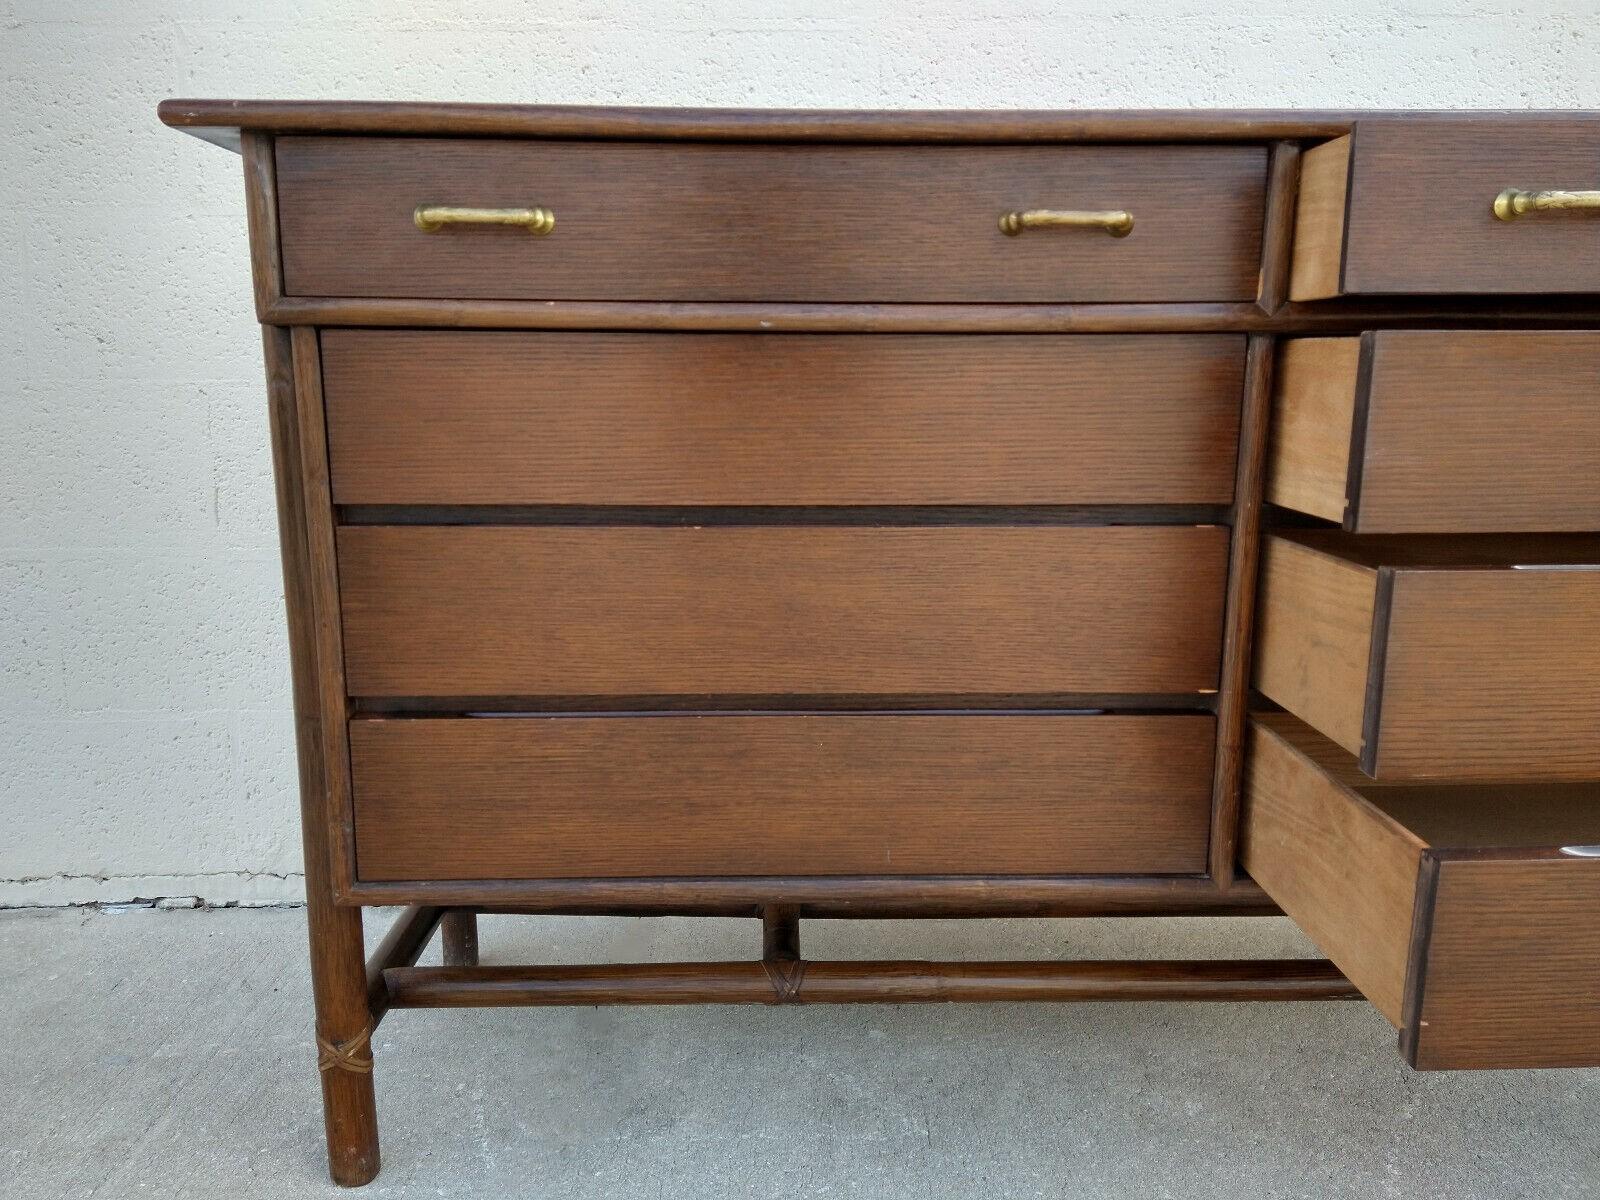 Hard to find Mid-Century Modern oak and rattan double chest by McGuire. The expertly crafted oak case has side mounted rattan legs reinforced with stretchers underneath. Rattan is detailed with McGuire's signature laced rawhide. This vintage chest